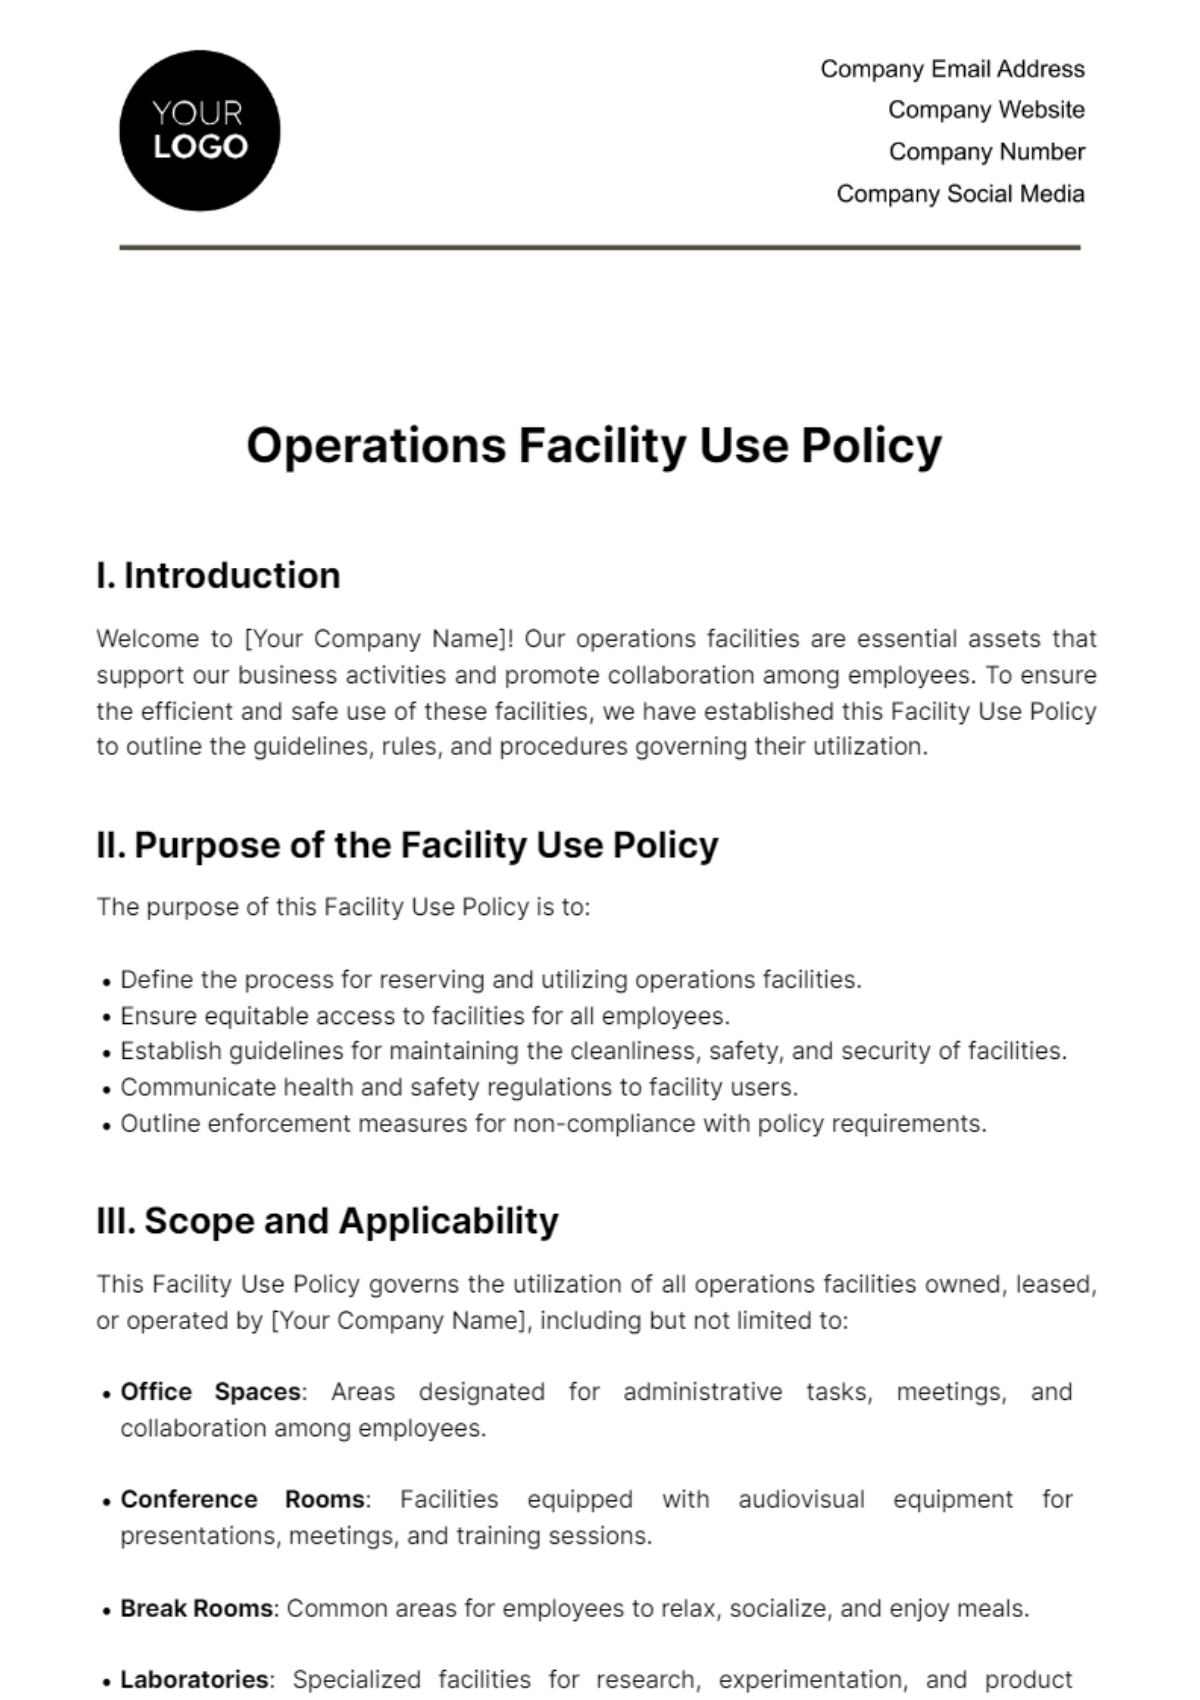 Free Operations Facility Use Policy Template